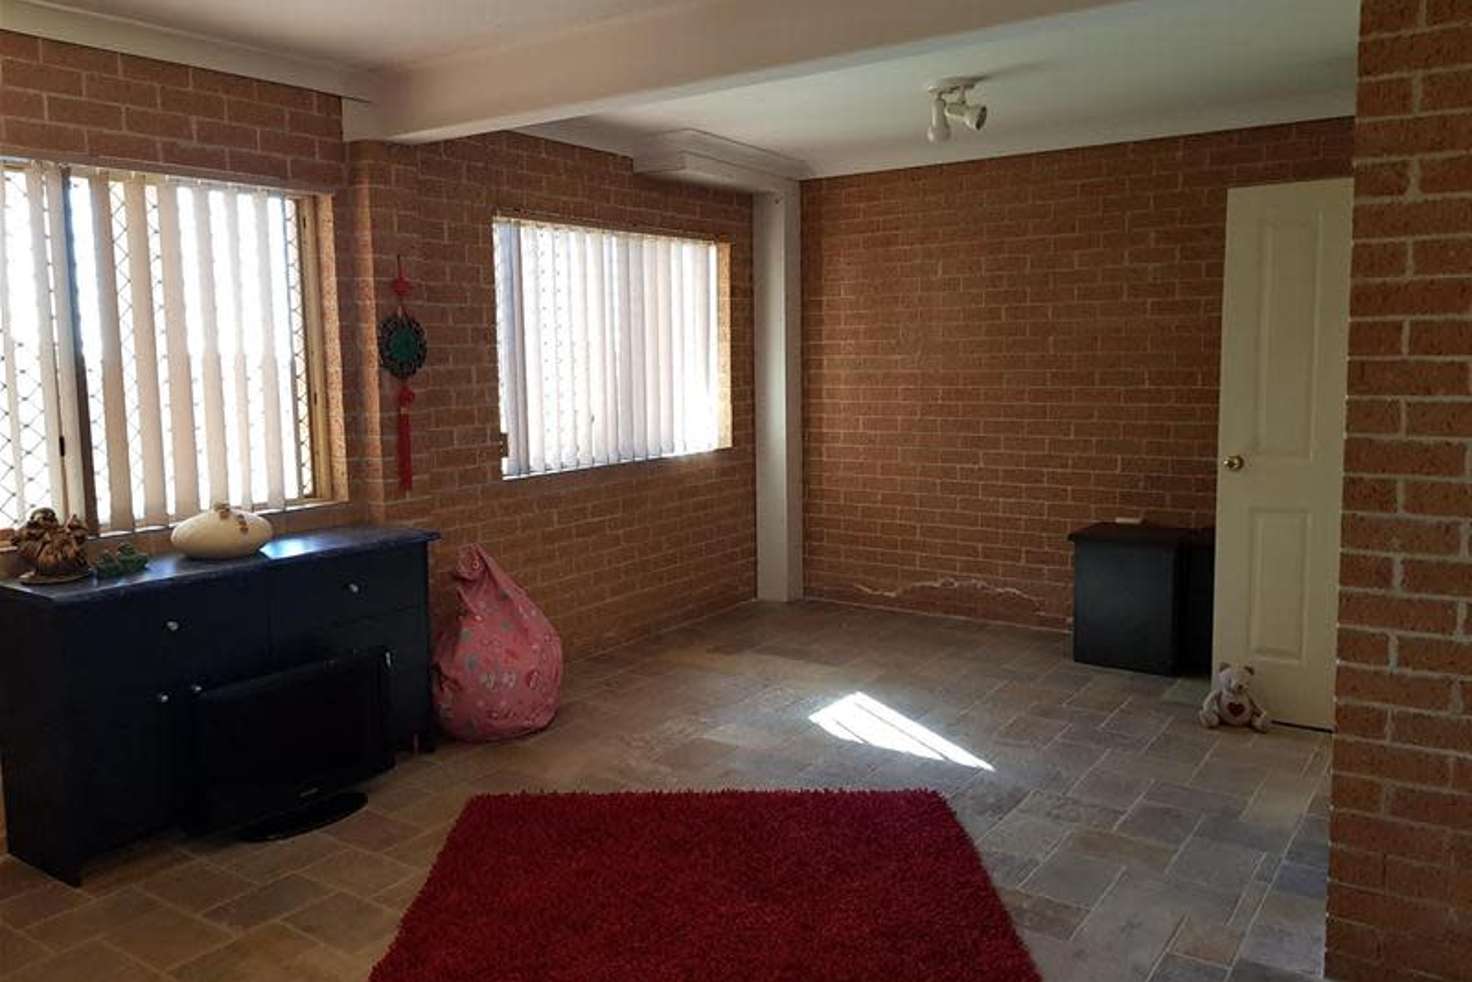 Main view of Homely unit listing, 24a Platypus Way, Blackbutt NSW 2529